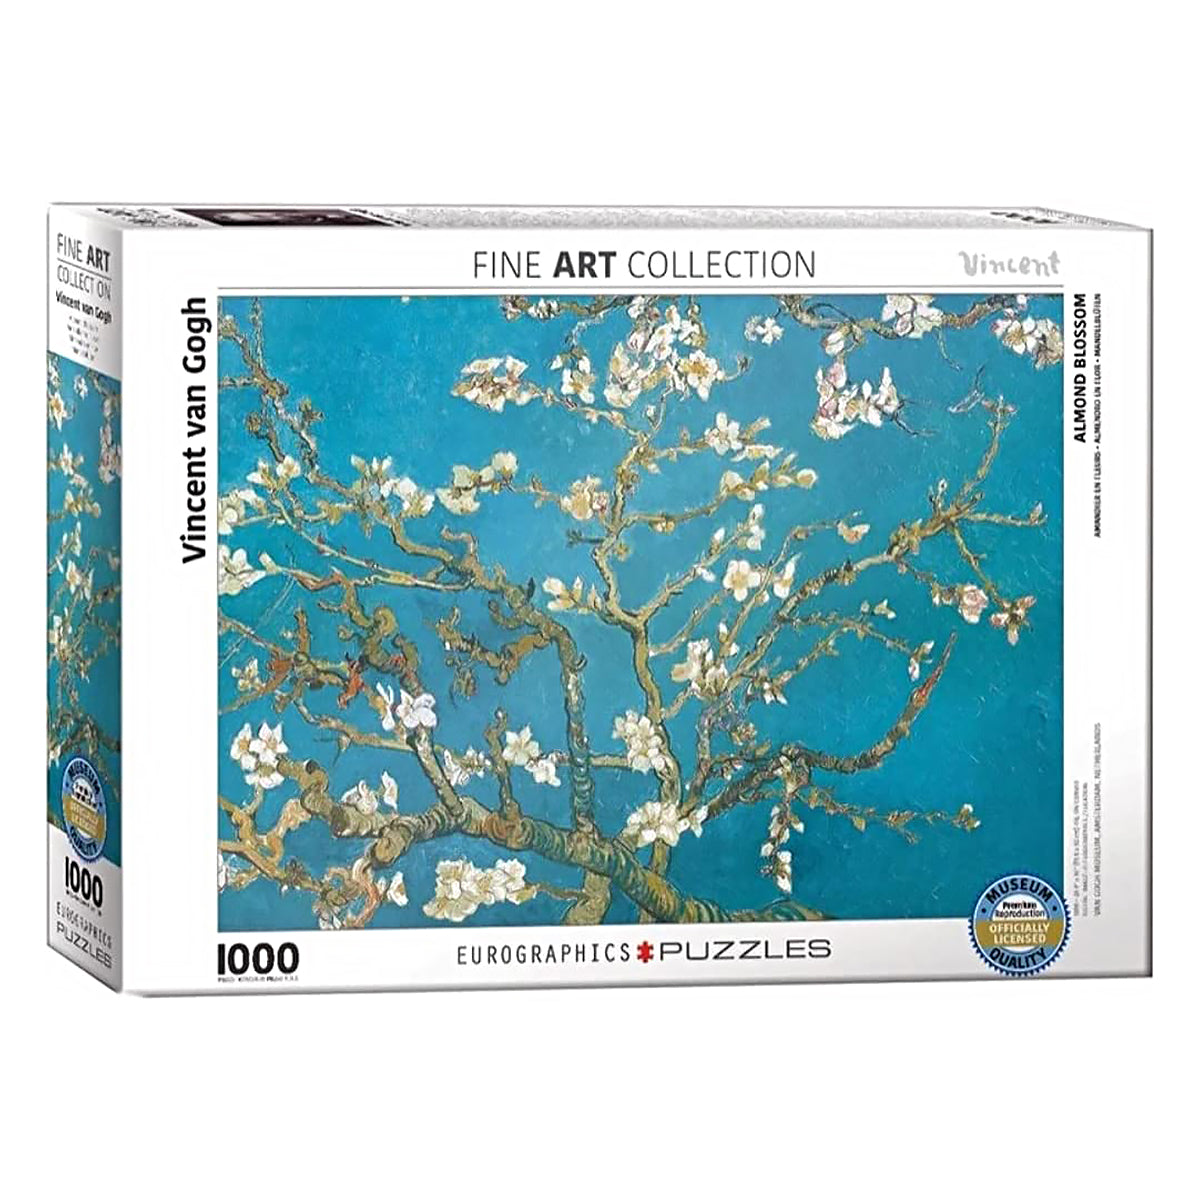 Vincent Van Gogh's Almond Blossom 1000-piece puzzle from Eurographics UK. Create stunning wall art with vibrant colors and intricate details. Relax and unwind with this high-quality puzzle for art lovers and enthusiasts.